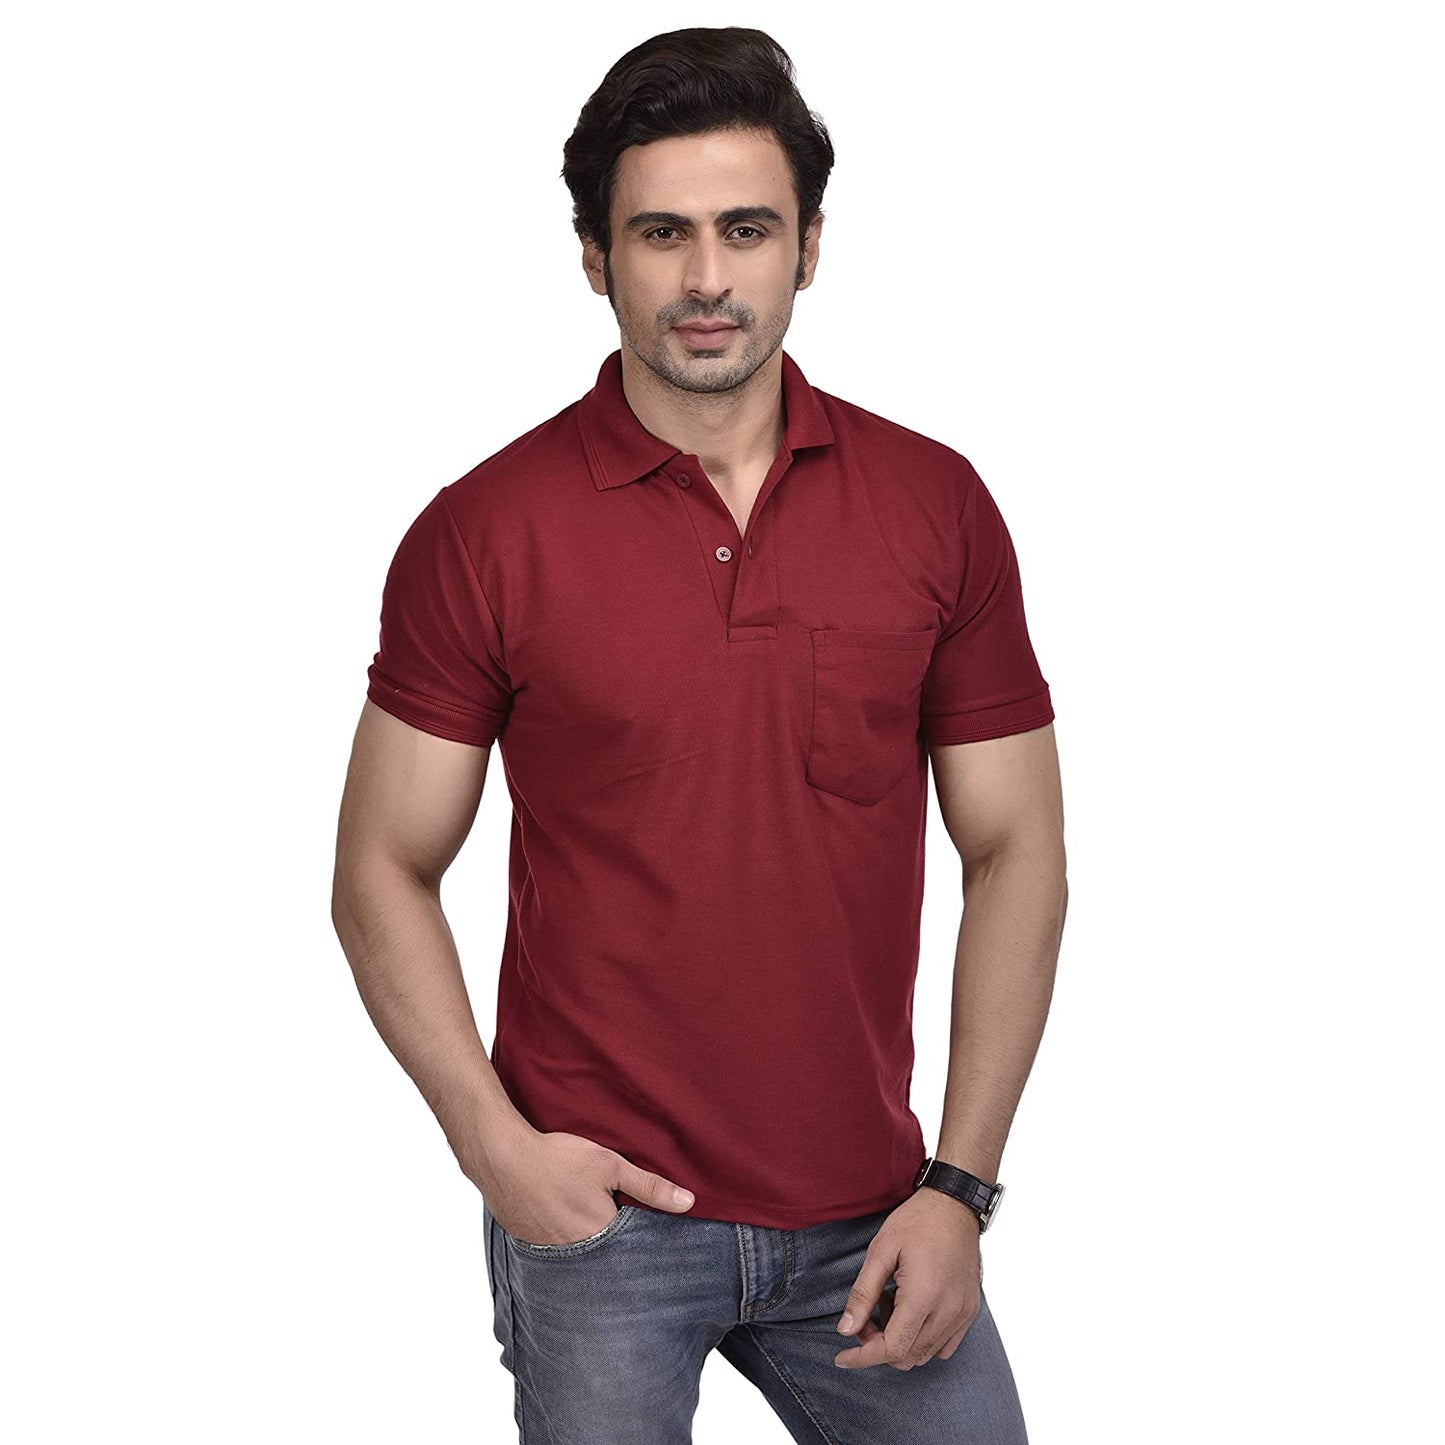 Pack of 5 Collar T-Shirt With Pocket ( Black + Navy + White +Bottle Green + Maroon )